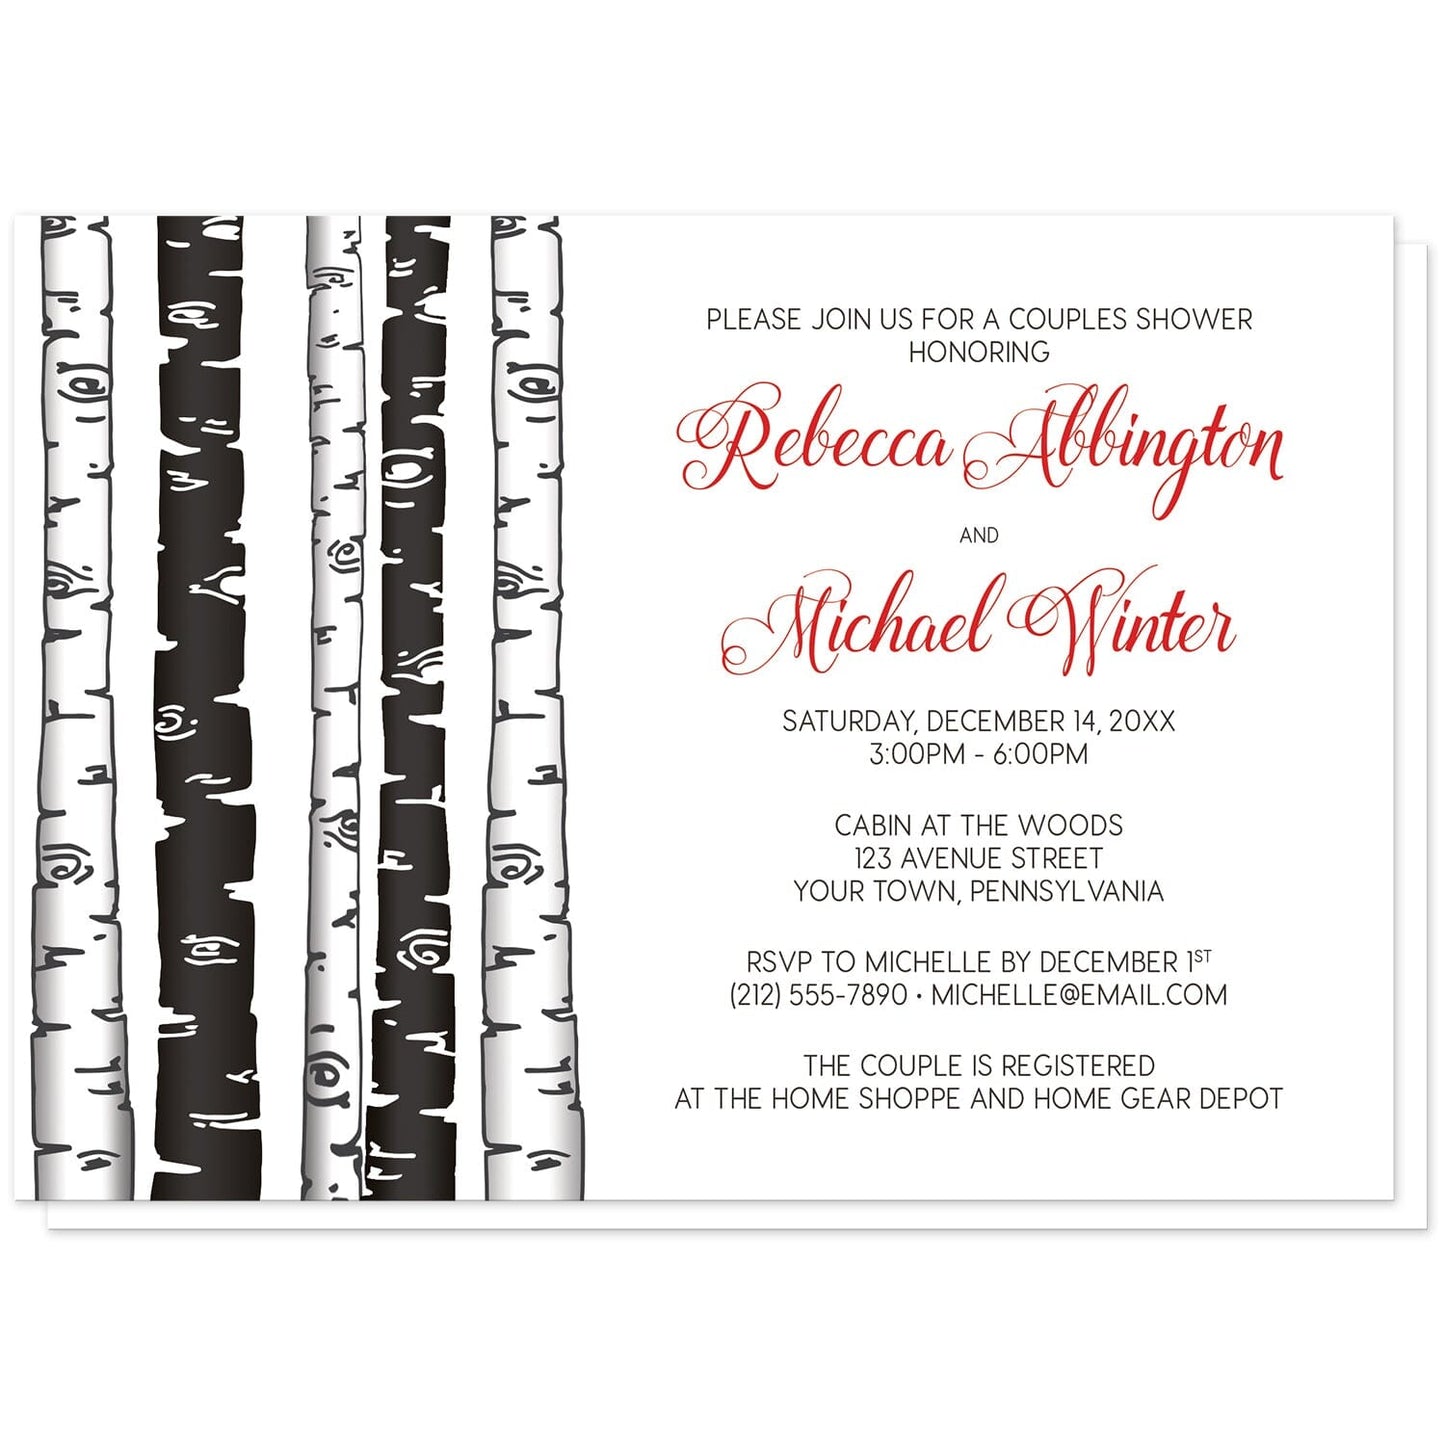 Monochrome Birch Tree with Red Couples Shower Invitations at Artistically Invited. Monochrome birch tree with red couples shower invitations with an alternating monochrome black and white birch trees illustration along the left side. Your personalized couples shower celebration details are custom printed beside the trees in black with the couple's names printed in a red script font for a splash of color.